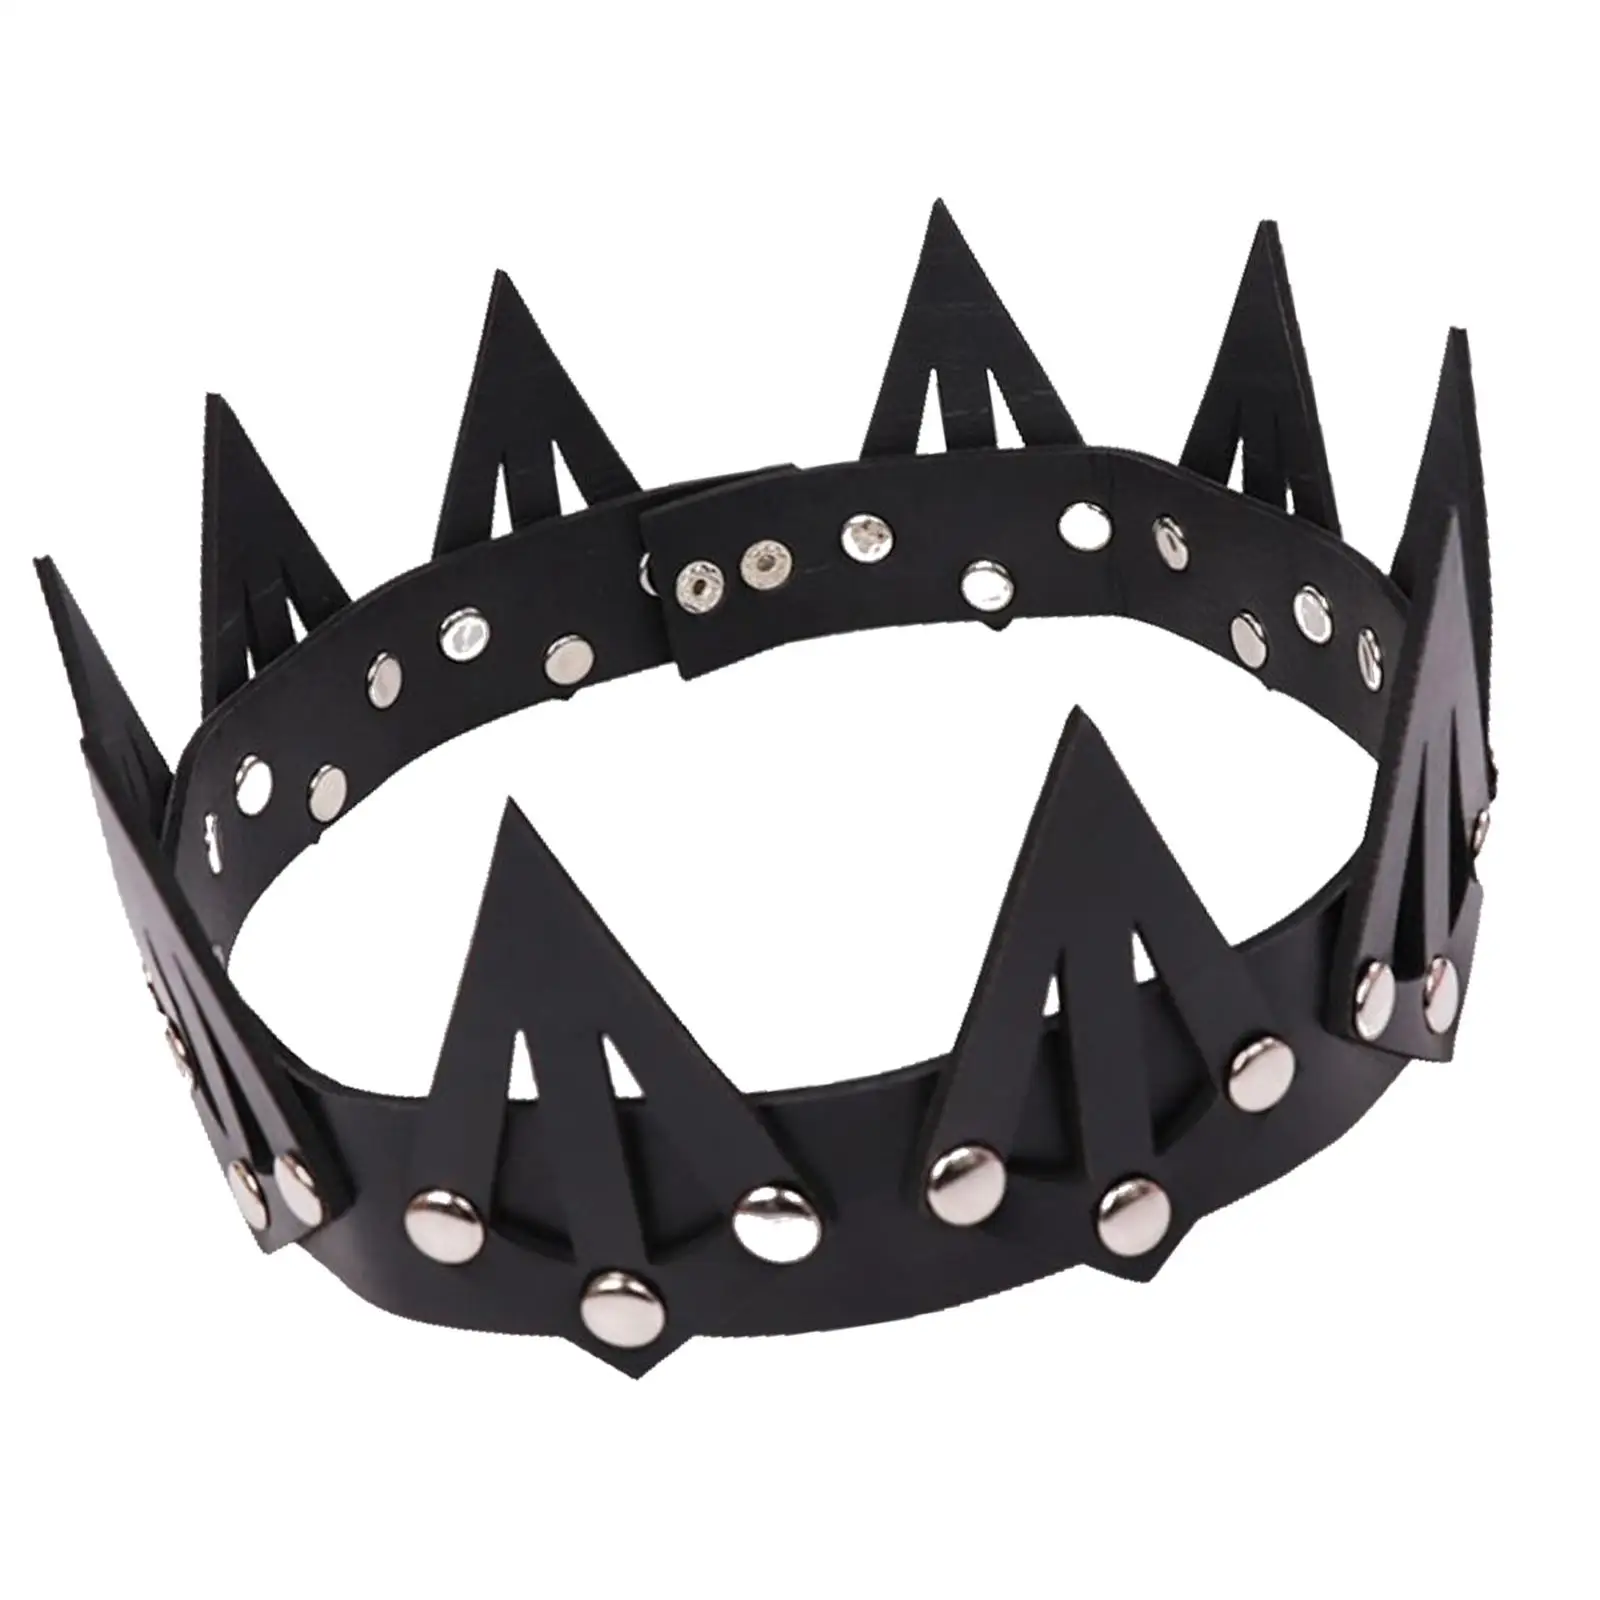 Medieval crown Tiara Antique Style Headband Black Decorative for Costume Accessories Prom Cosplay Party Princess